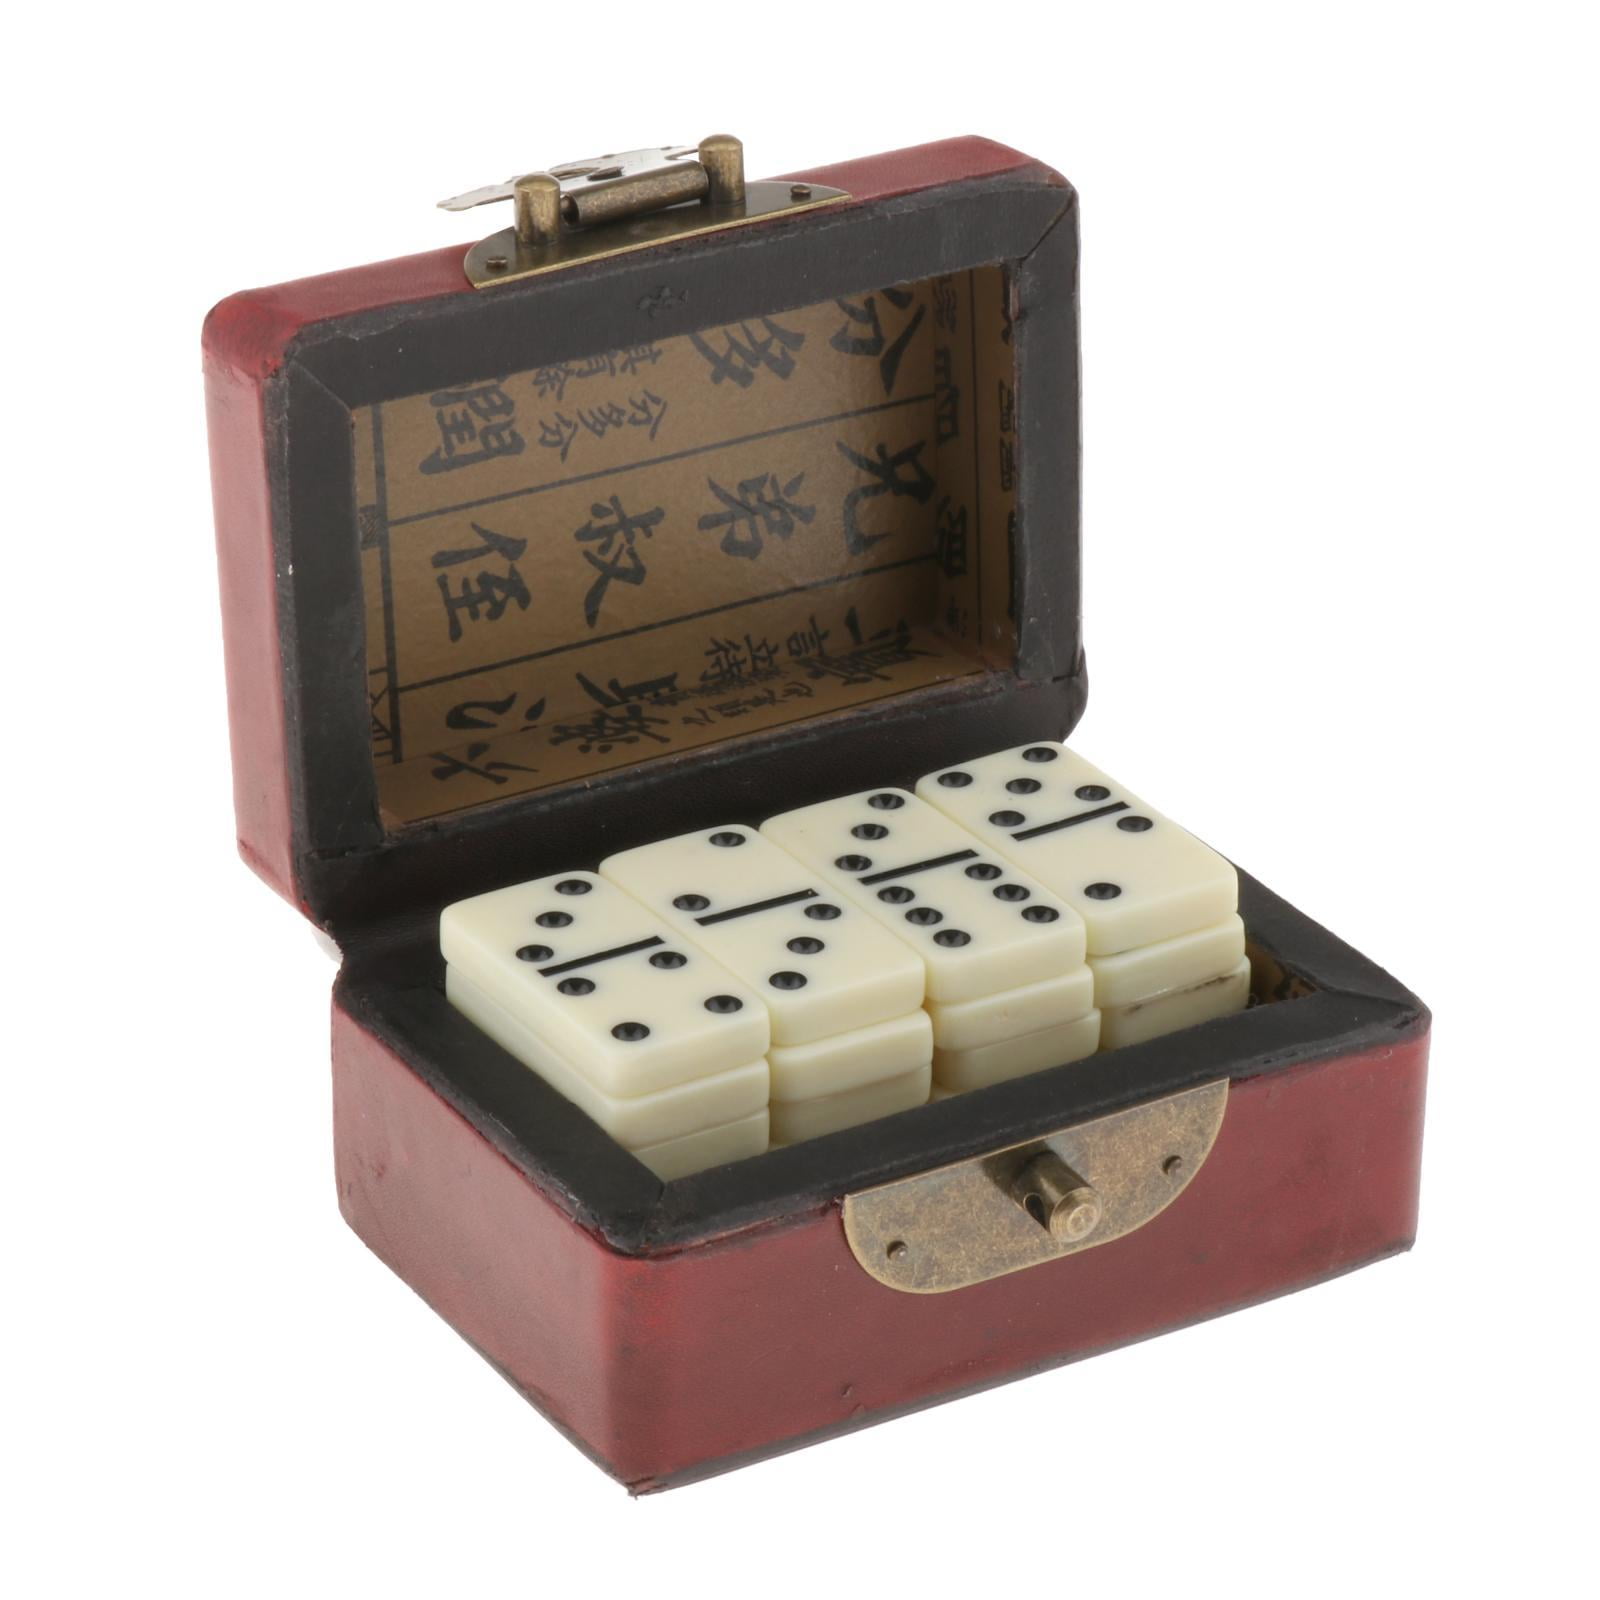 NEW CARDS DICE DOMINOES STICKS GAME SET IN WOODEN TRAVEL CARRY BOX CASE LEGLER 